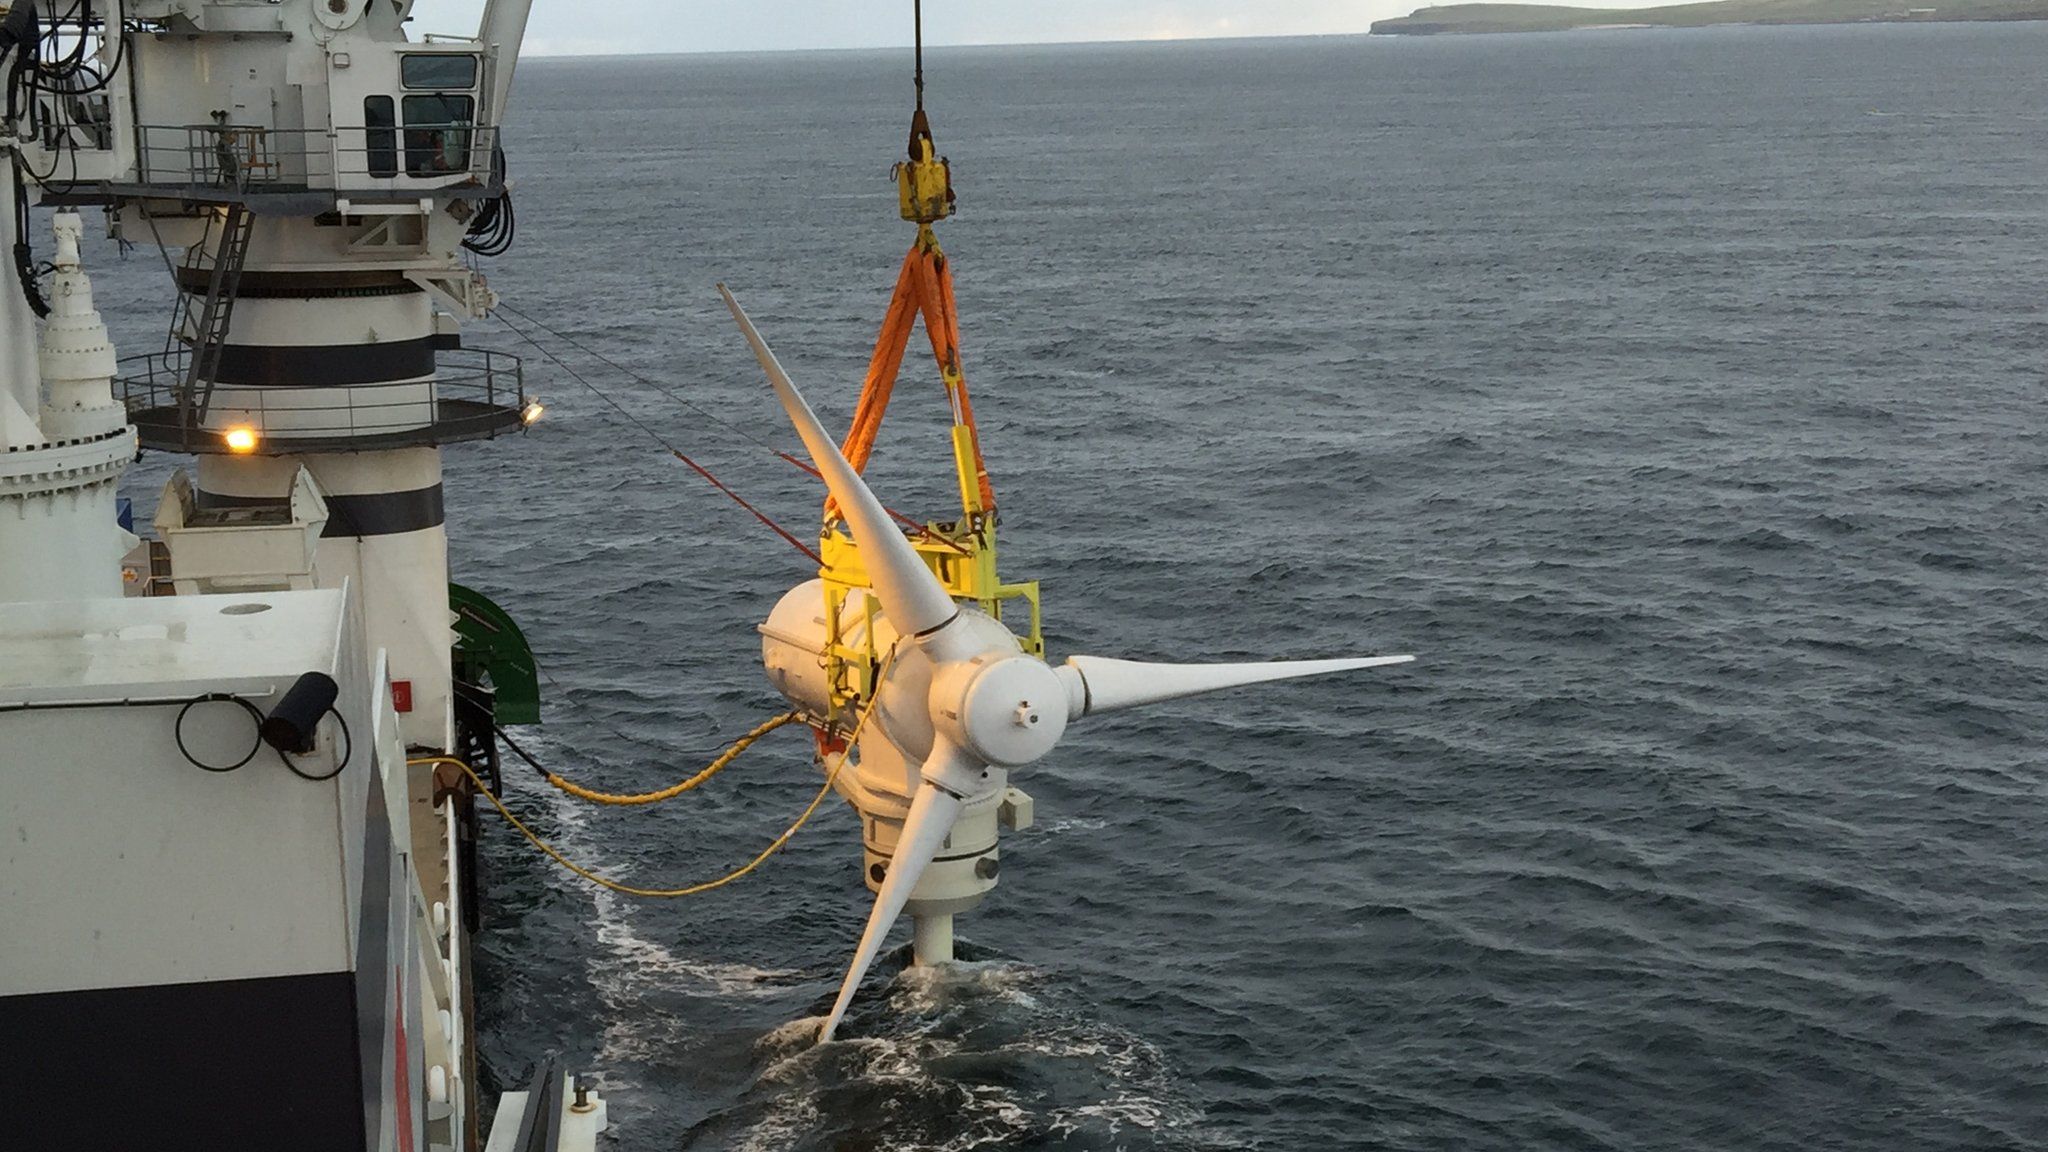 Tidal turbine being lowered in Inner Sound